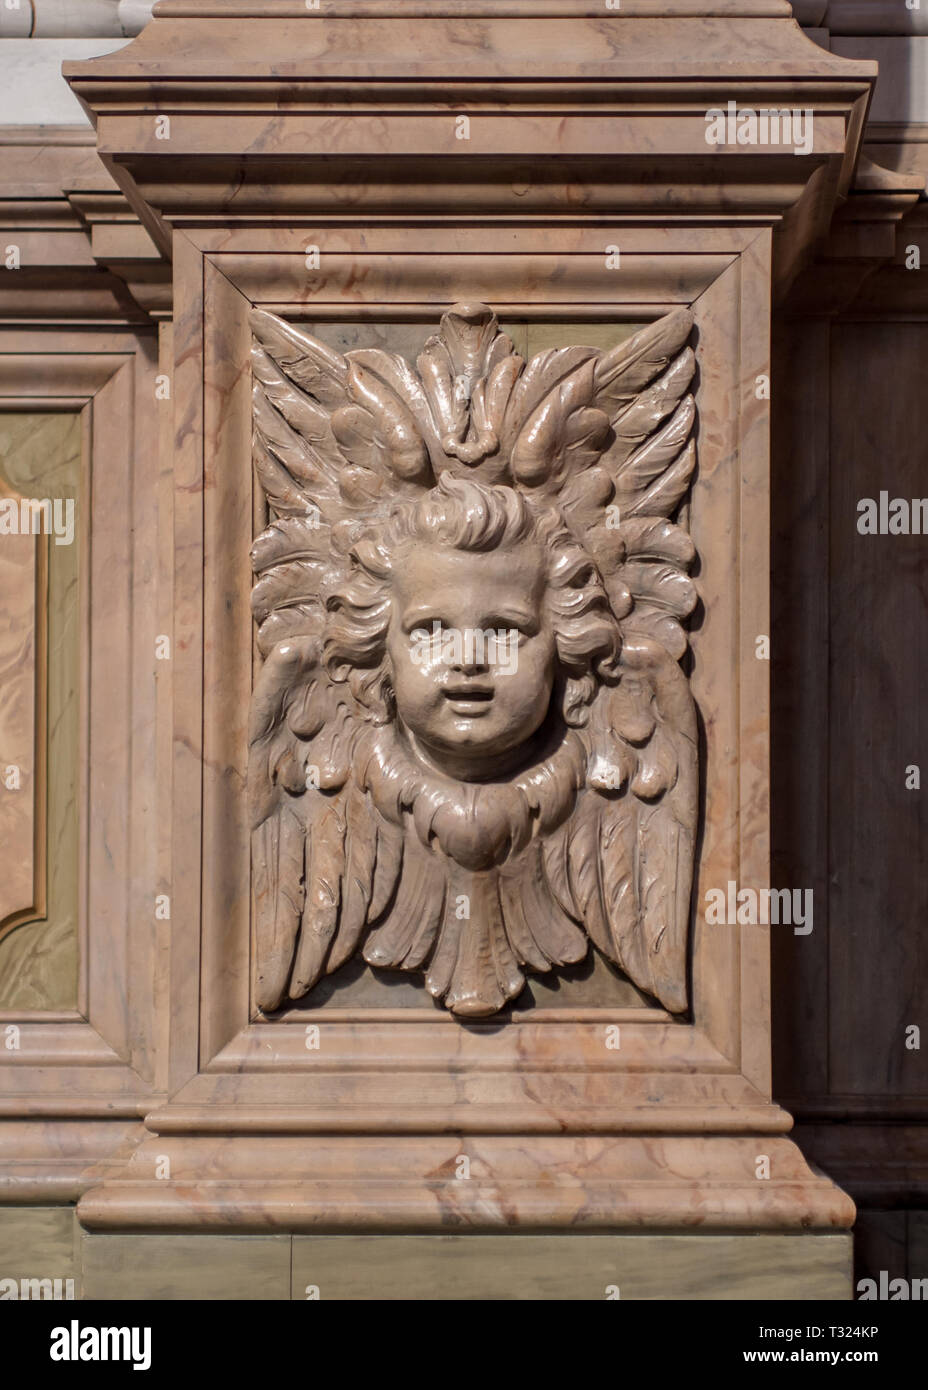 A cherub peers out from a marble pillar in Frederik's Church (the Marble Church) in Copenhagen. Stock Photo